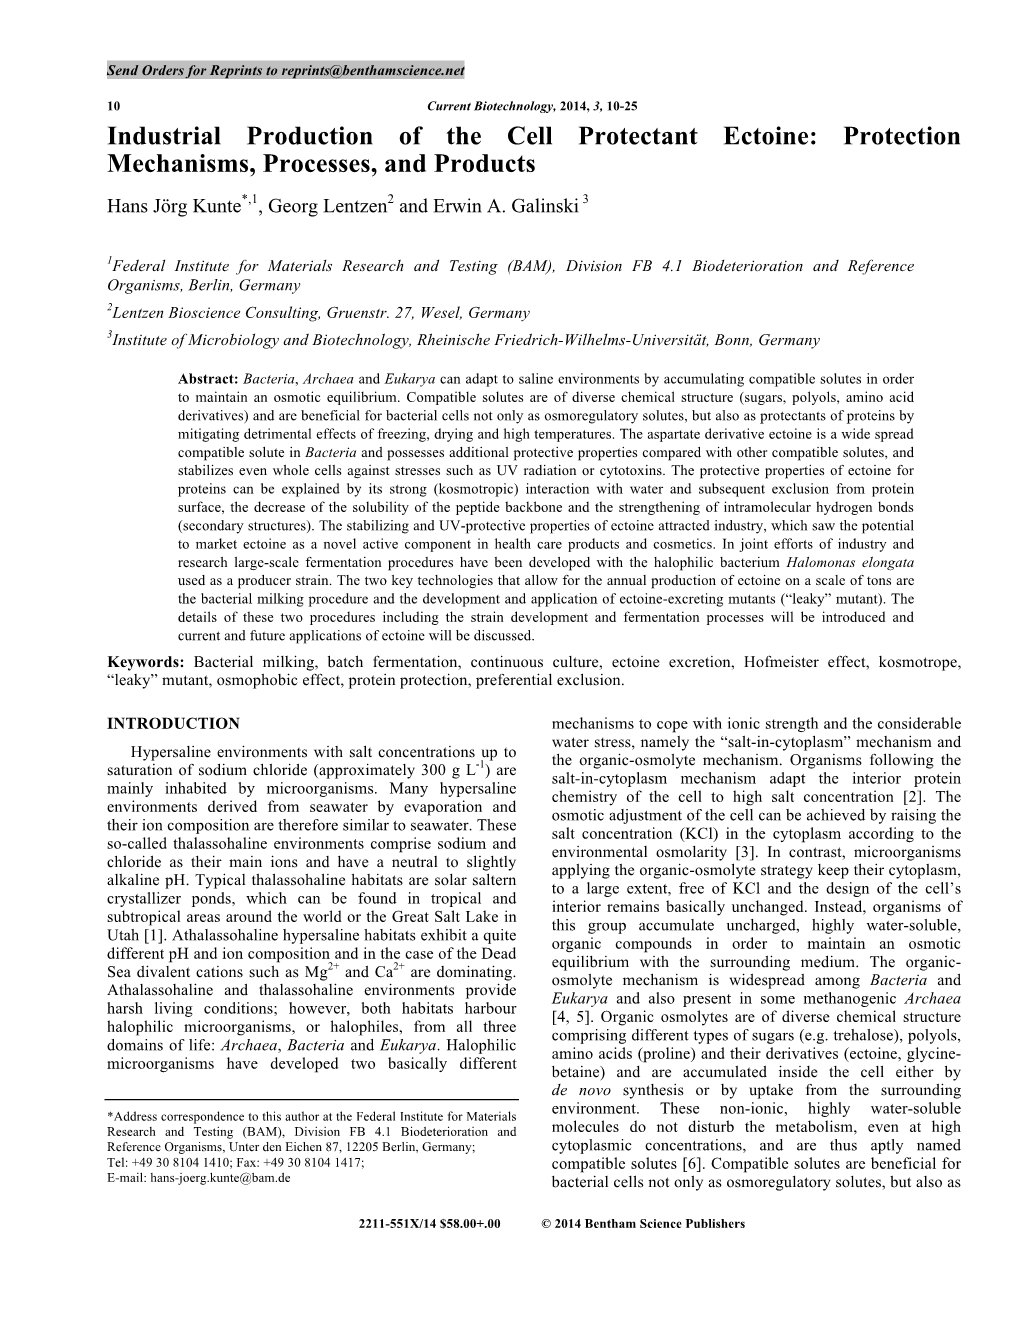 Industrial Production of the Cell Protectant Ectoine: Protection Mechanisms, Processes, and Products